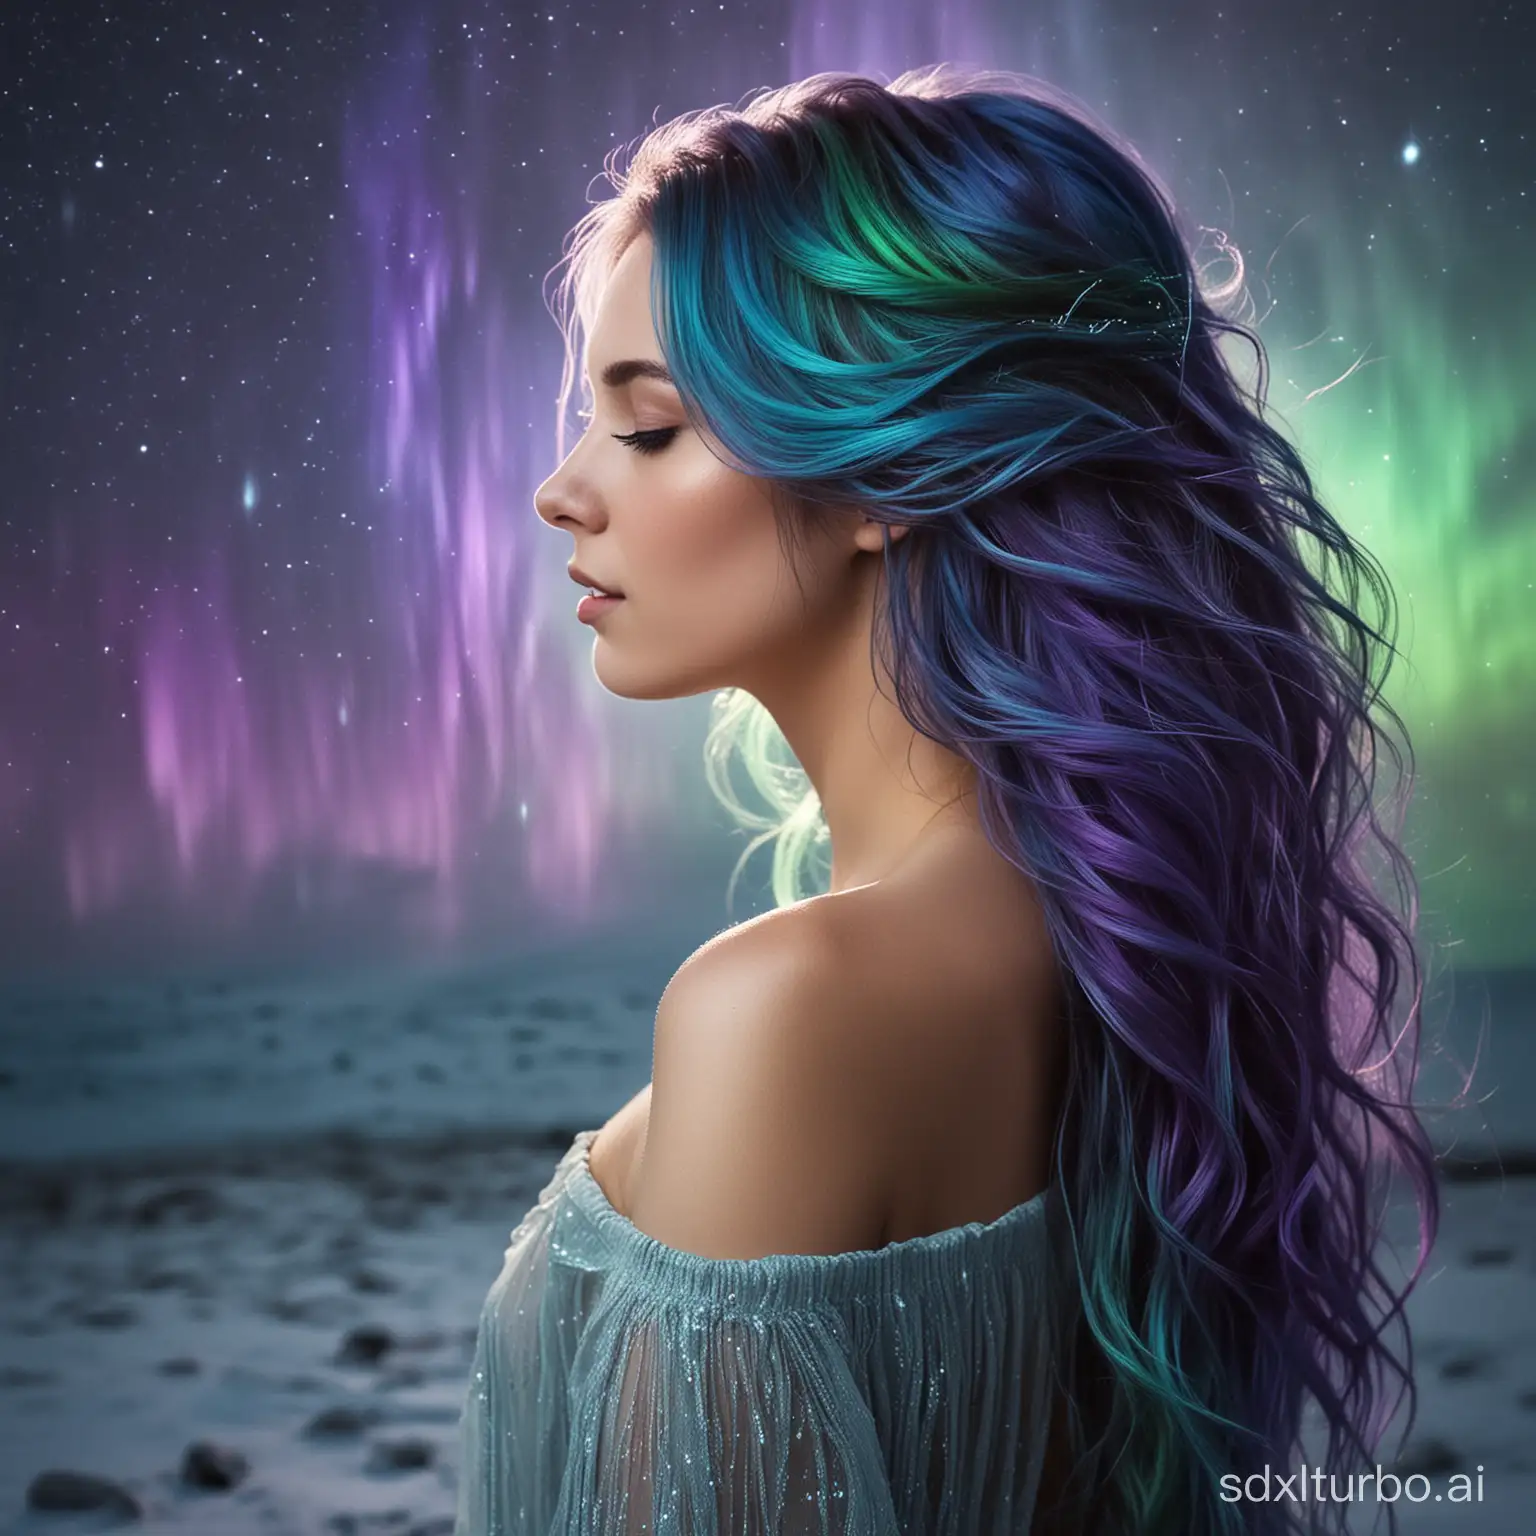 girl with hair styled to resemble the ethereal beauty of the Northern Lights. Her flowing locks cascade down her shoulders and appear to be infused with vibrant hues reminiscent of the Aurora Borealis. The colors gracefully blend together, creating a mesmerizing display of purples, blues, and greens. The girl's hair seems to shimmer and dance as if capturing the enchanting essence of the Northern Lights, while the background remains serene and devoid of any celestial phenomena